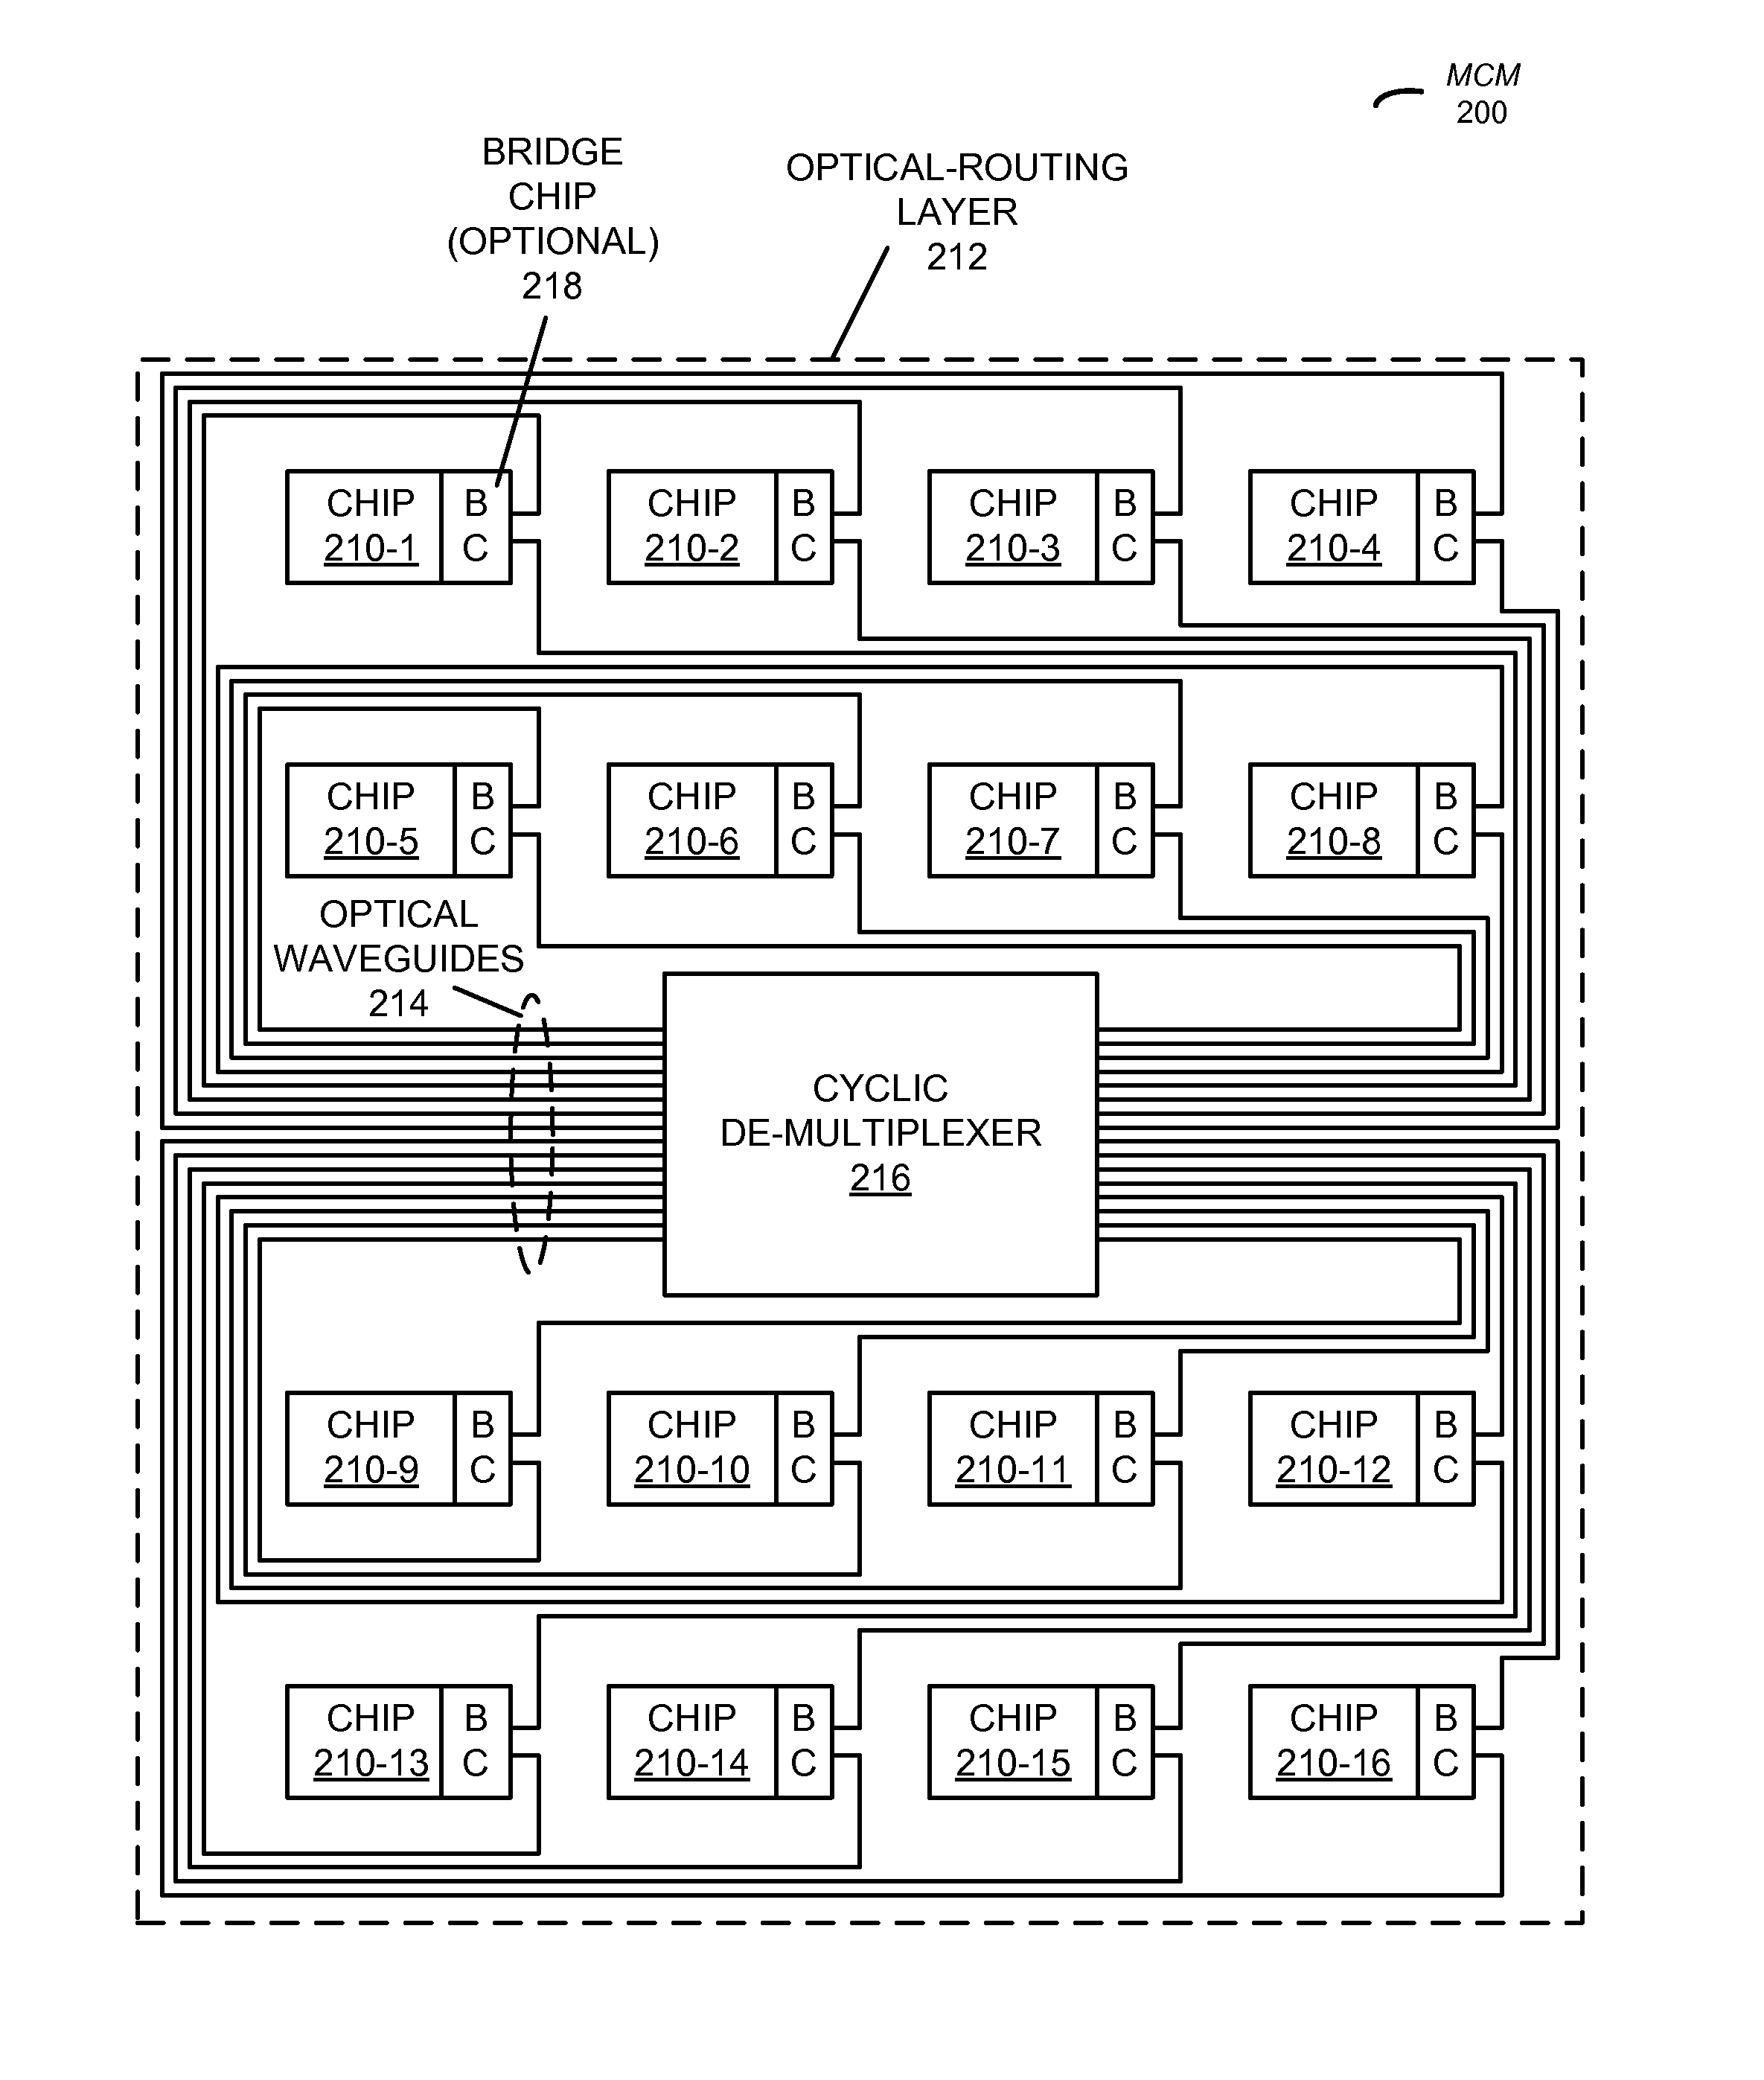 Single- layer full-mesh, point-to-point network